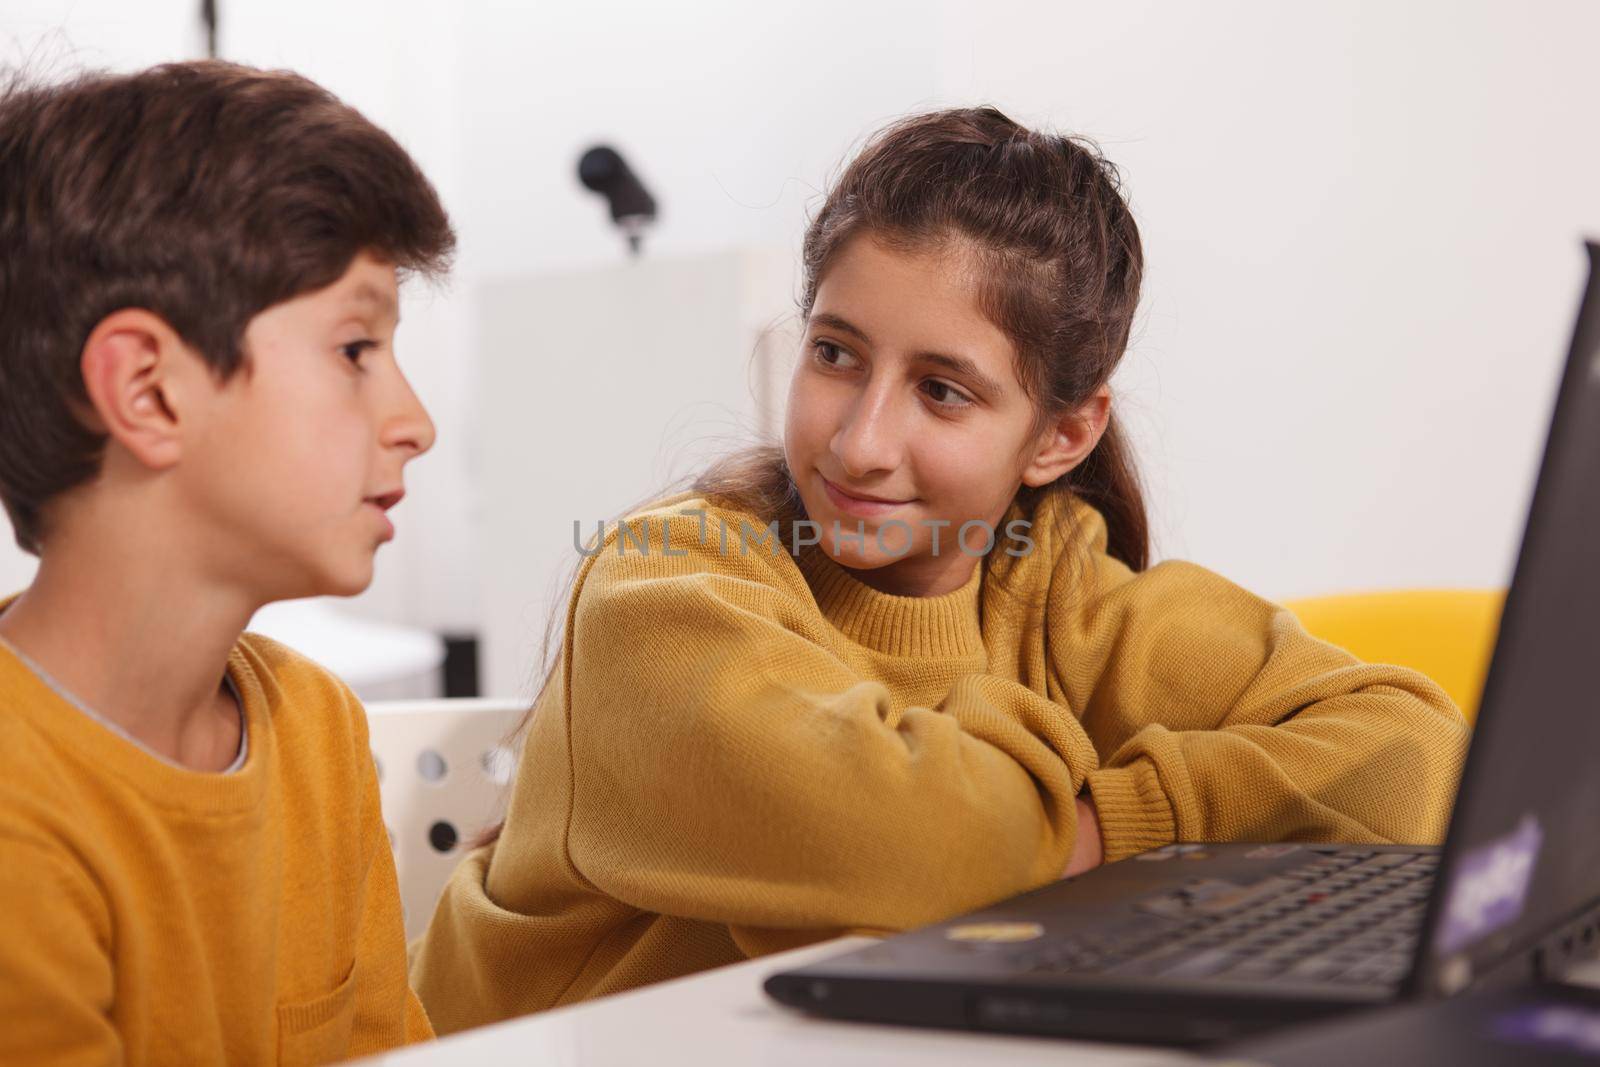 Lovely teen Arab girl talking to her little brother while doing homework together on a laptop